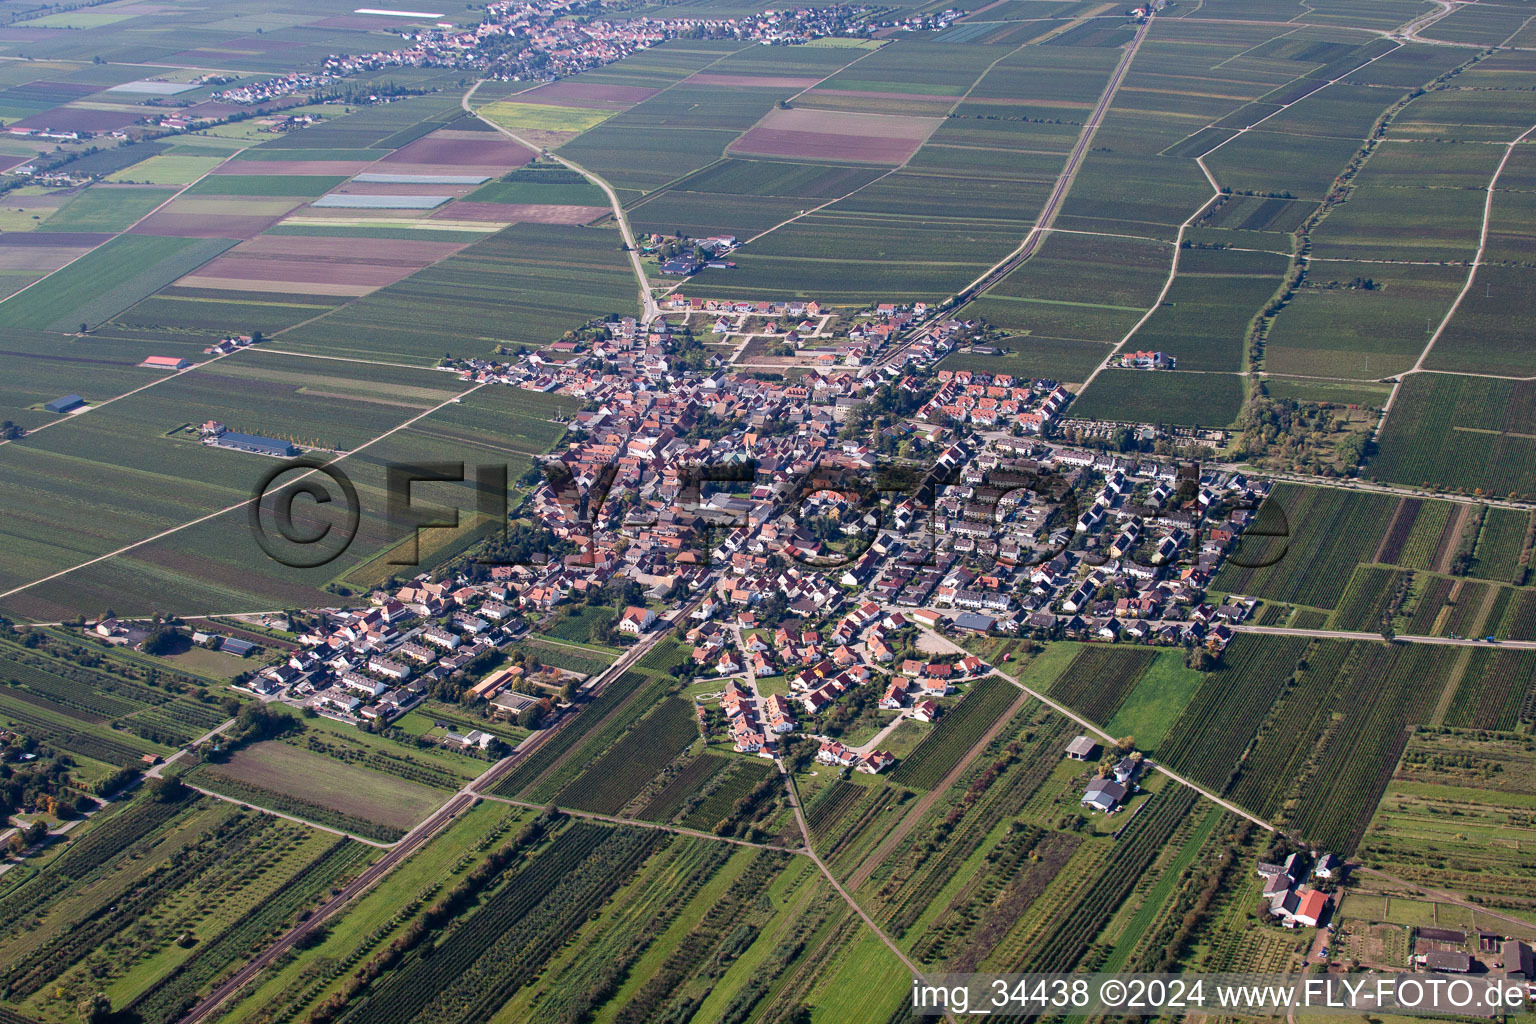 Aerial view of Village - view on the edge of agricultural fields and farmland in Fussgoenheim in the state Rhineland-Palatinate, Germany